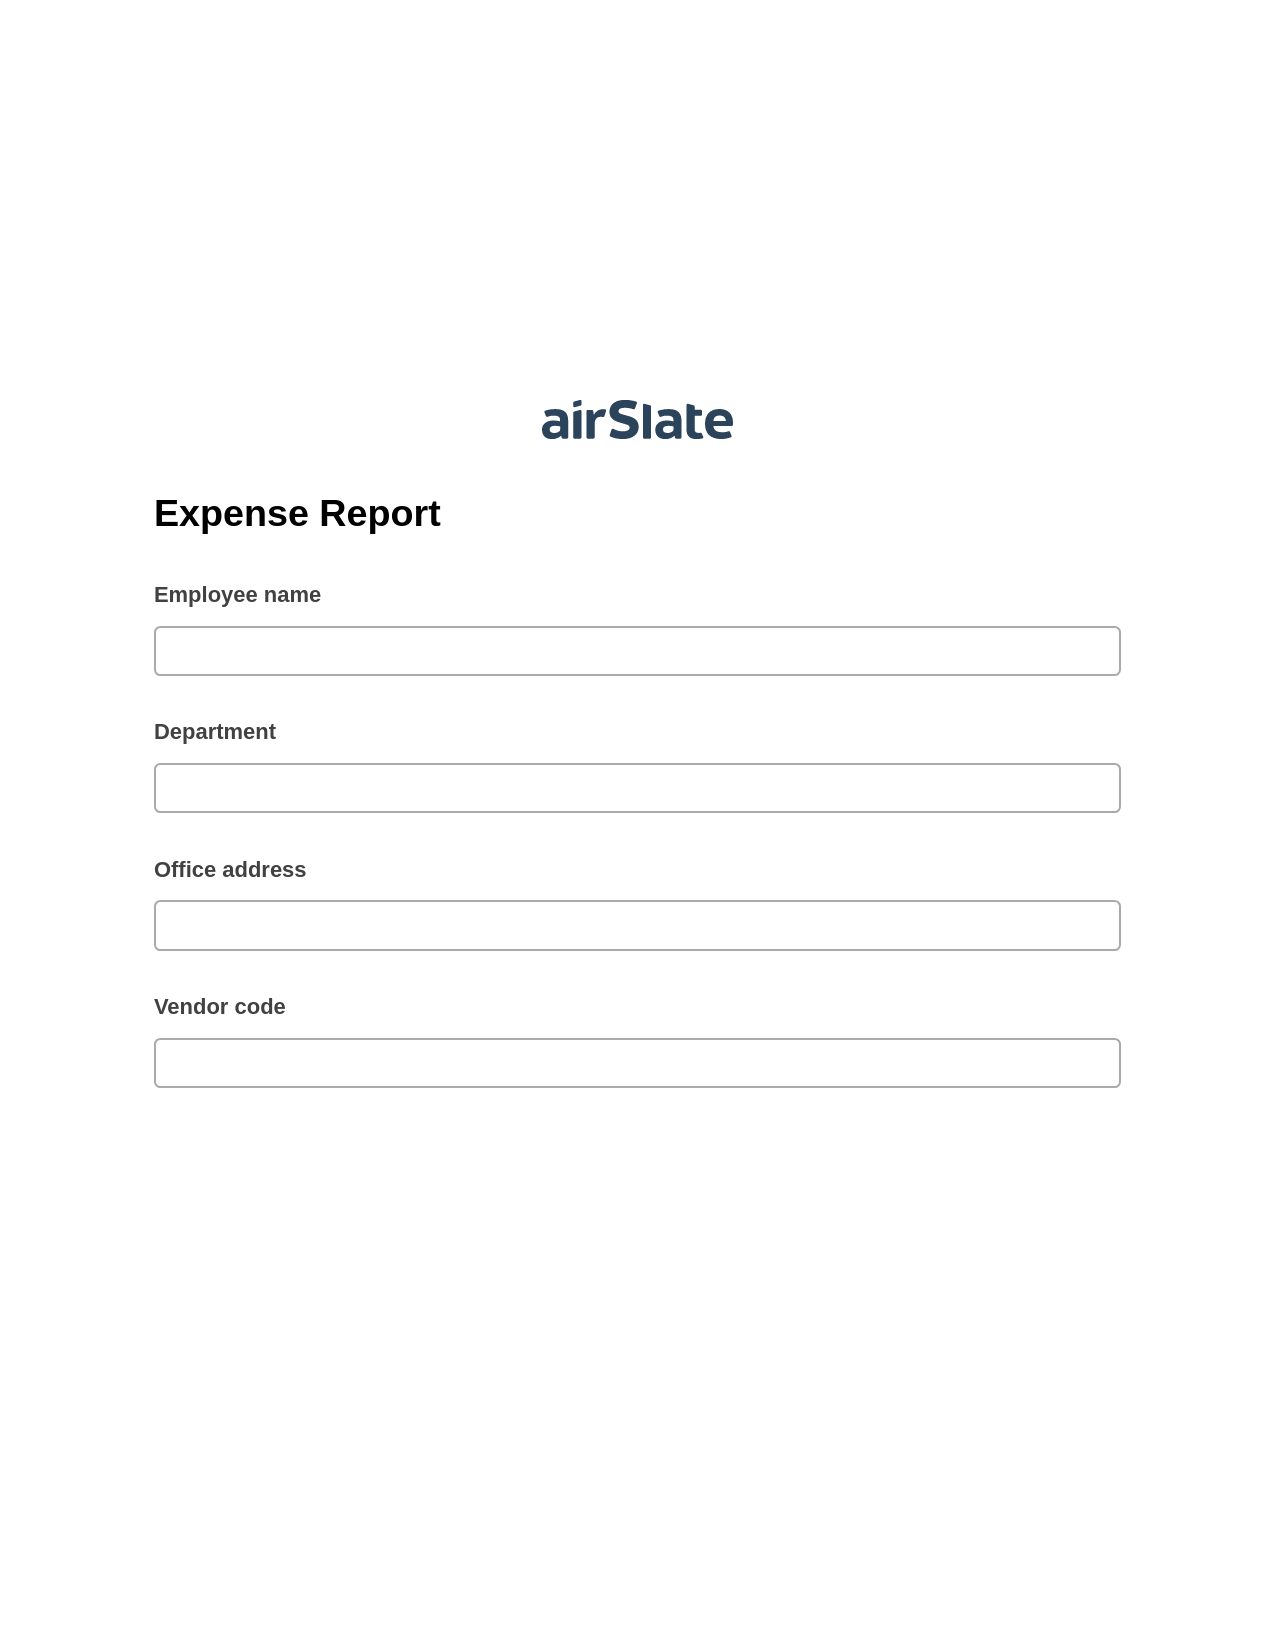 Multirole Expense Report Pre-fill Slate from MS Dynamics 365 Records Bot, System Bot - Create a Slate in another Flow, Email Notification Postfinish Bot